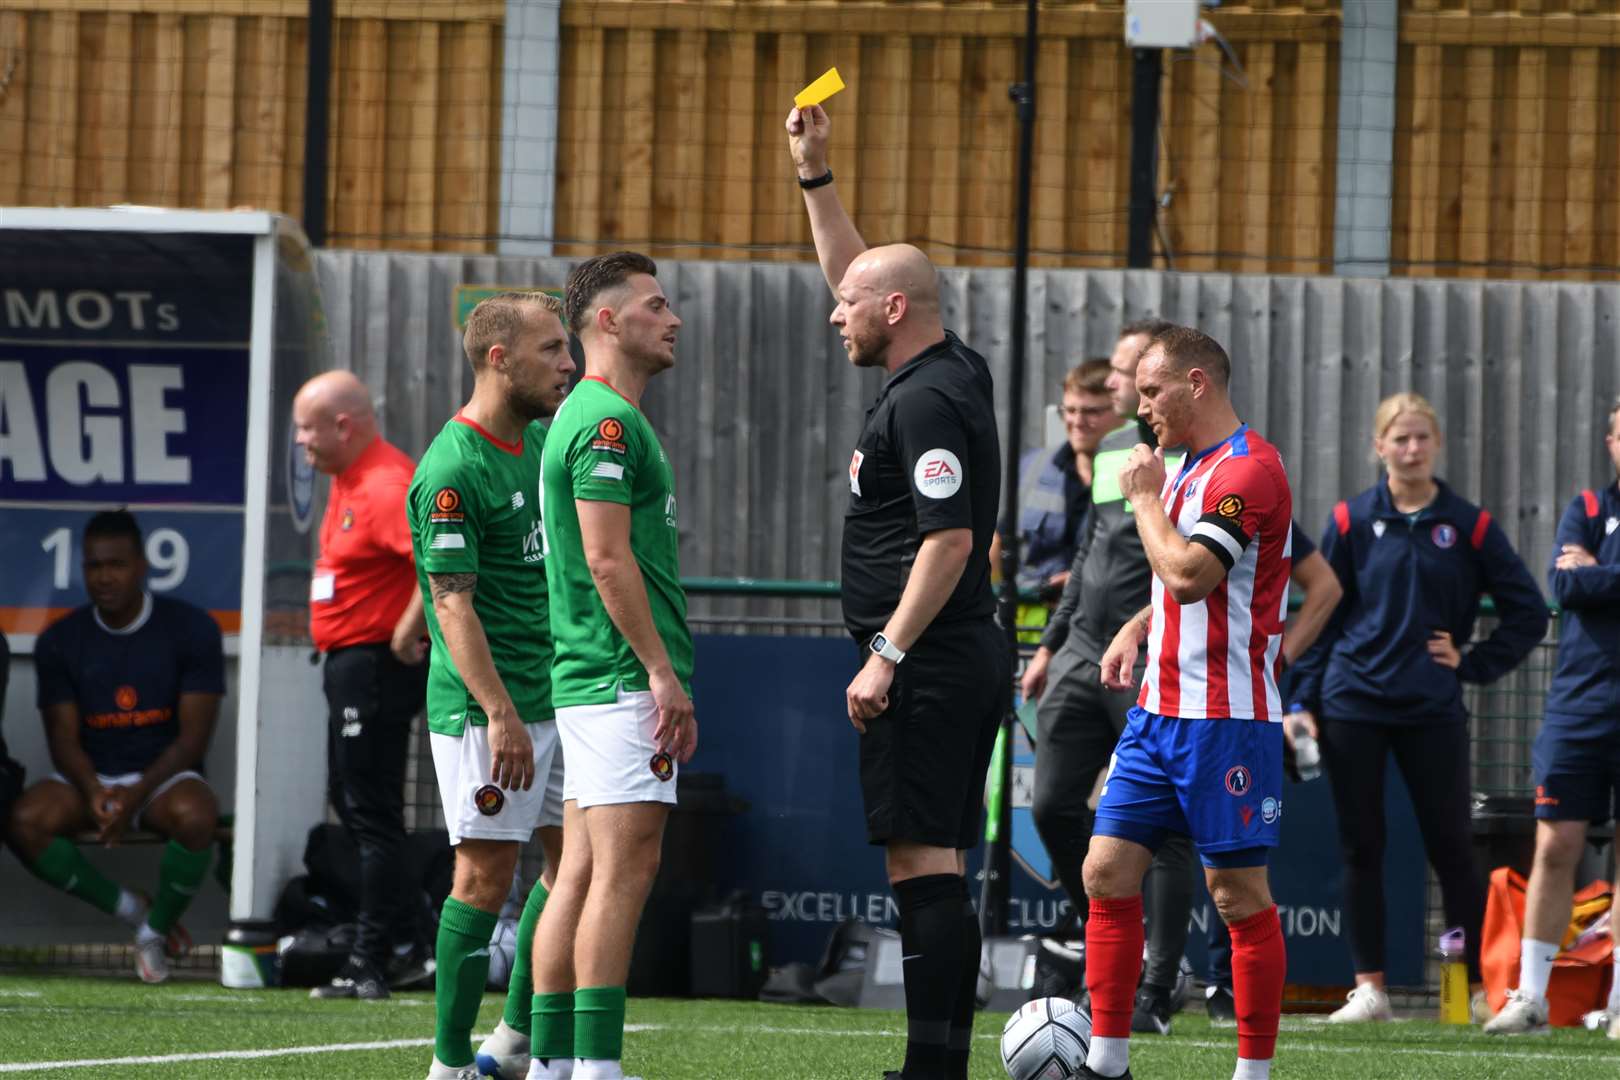 Ebbsfleet's Jack Paxman collects a yellow card in the first half. Picture: Barry Goodwin